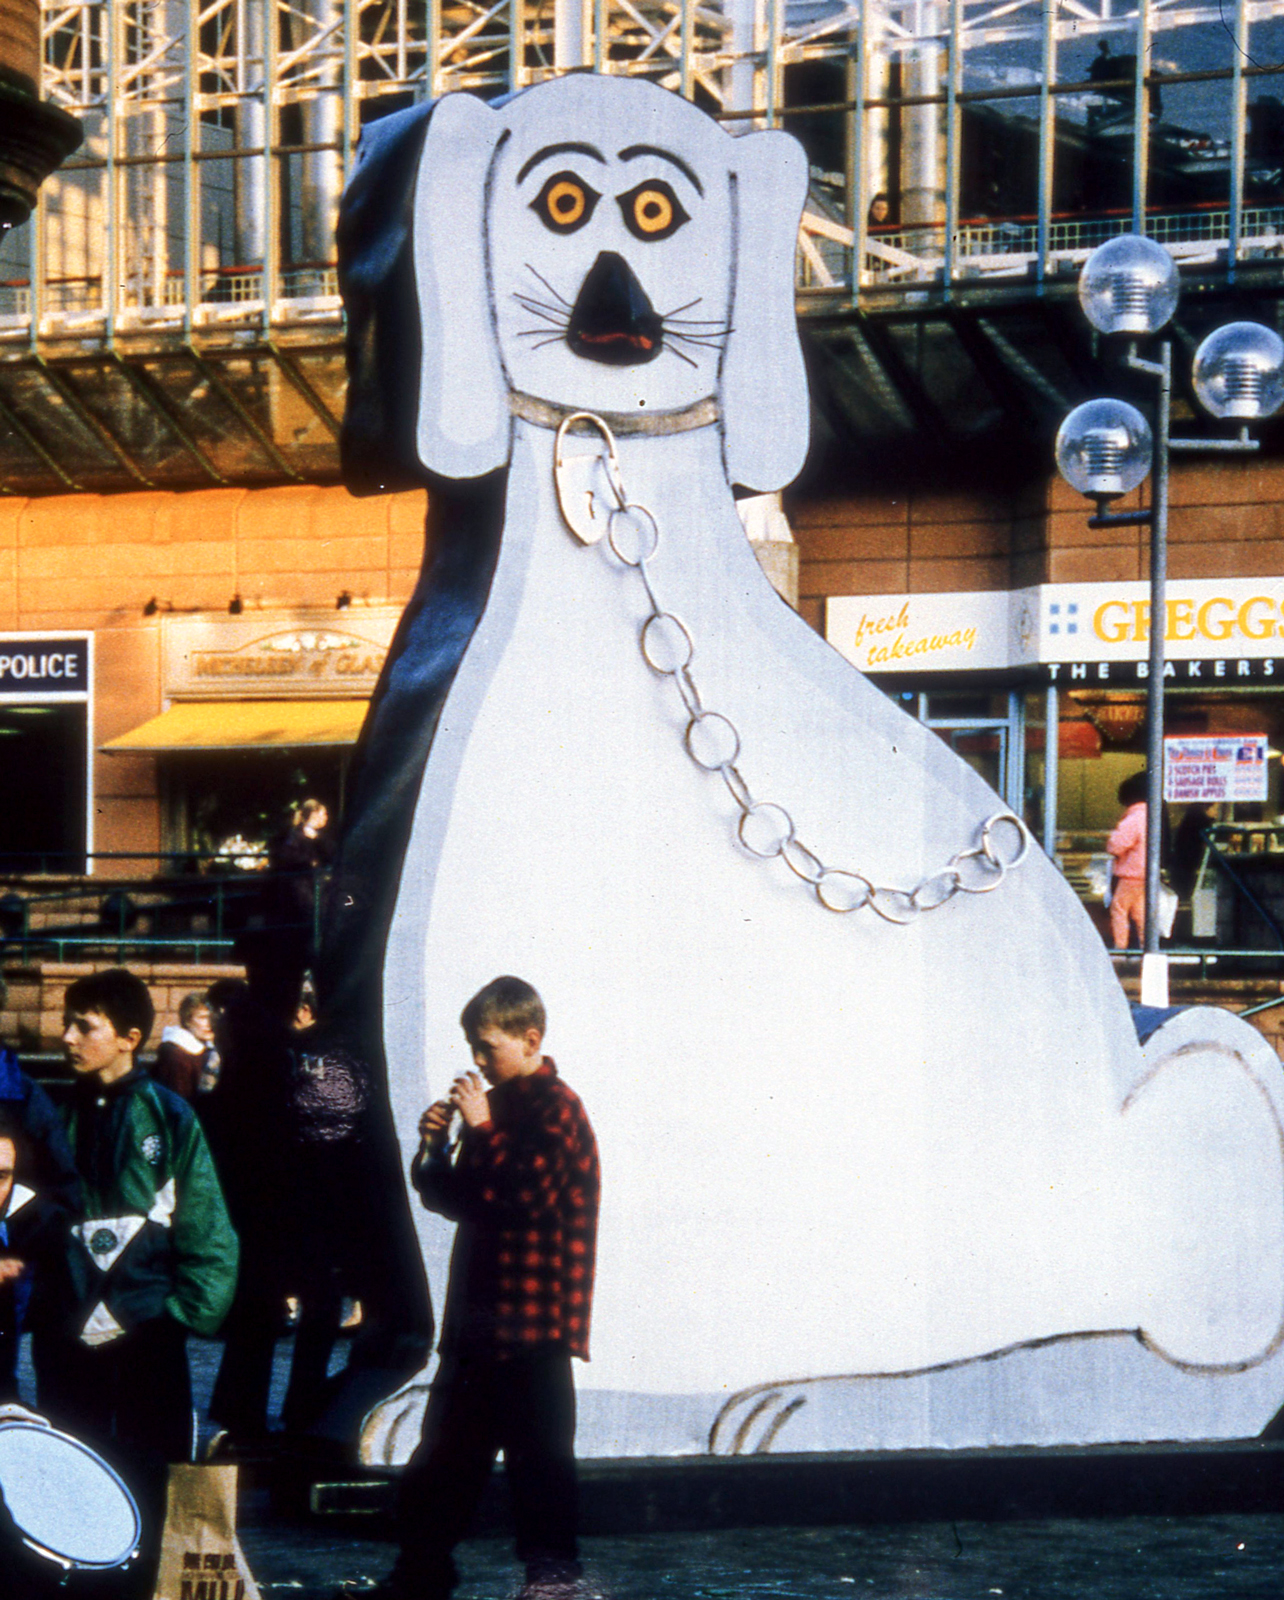 George Wyllie's 15 foot Wally Dug sculpture on a trailer in St Enoch Square Glasgow